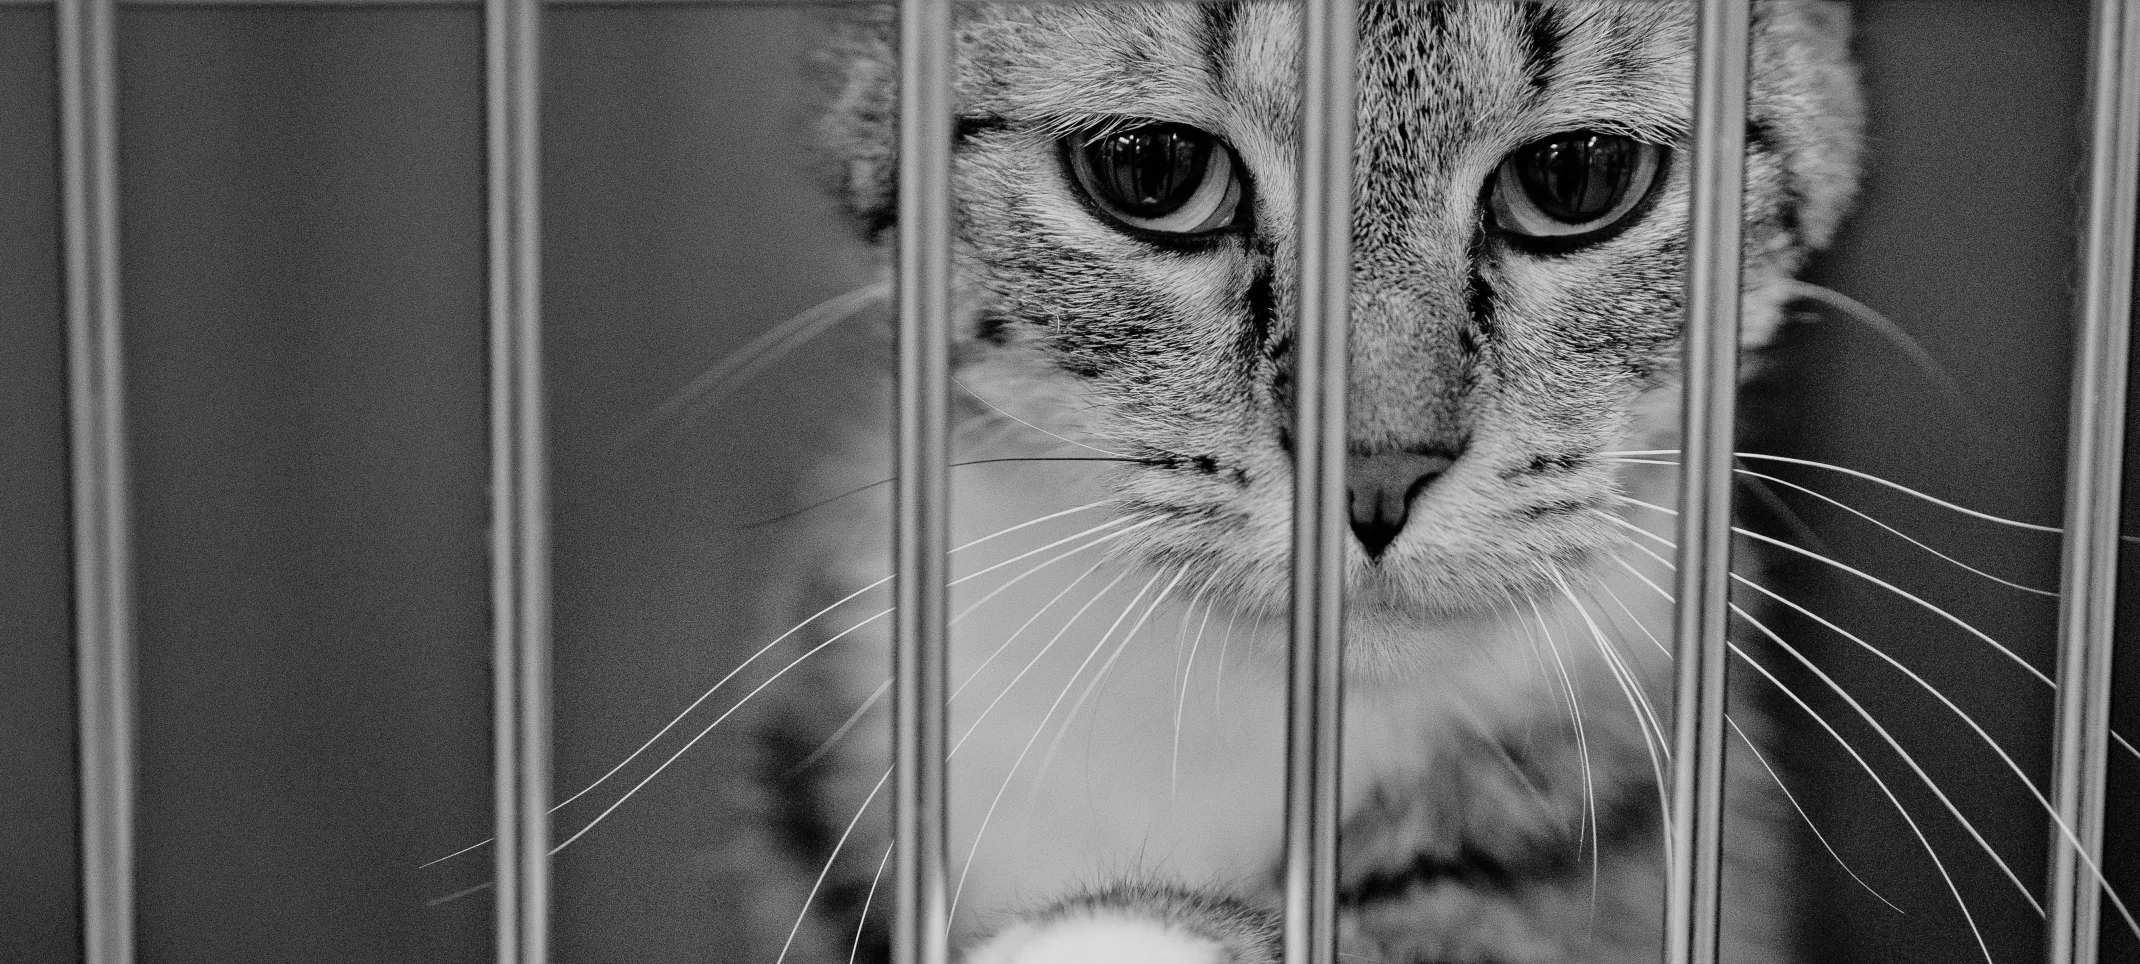 Black and white photo of a cat in a crate